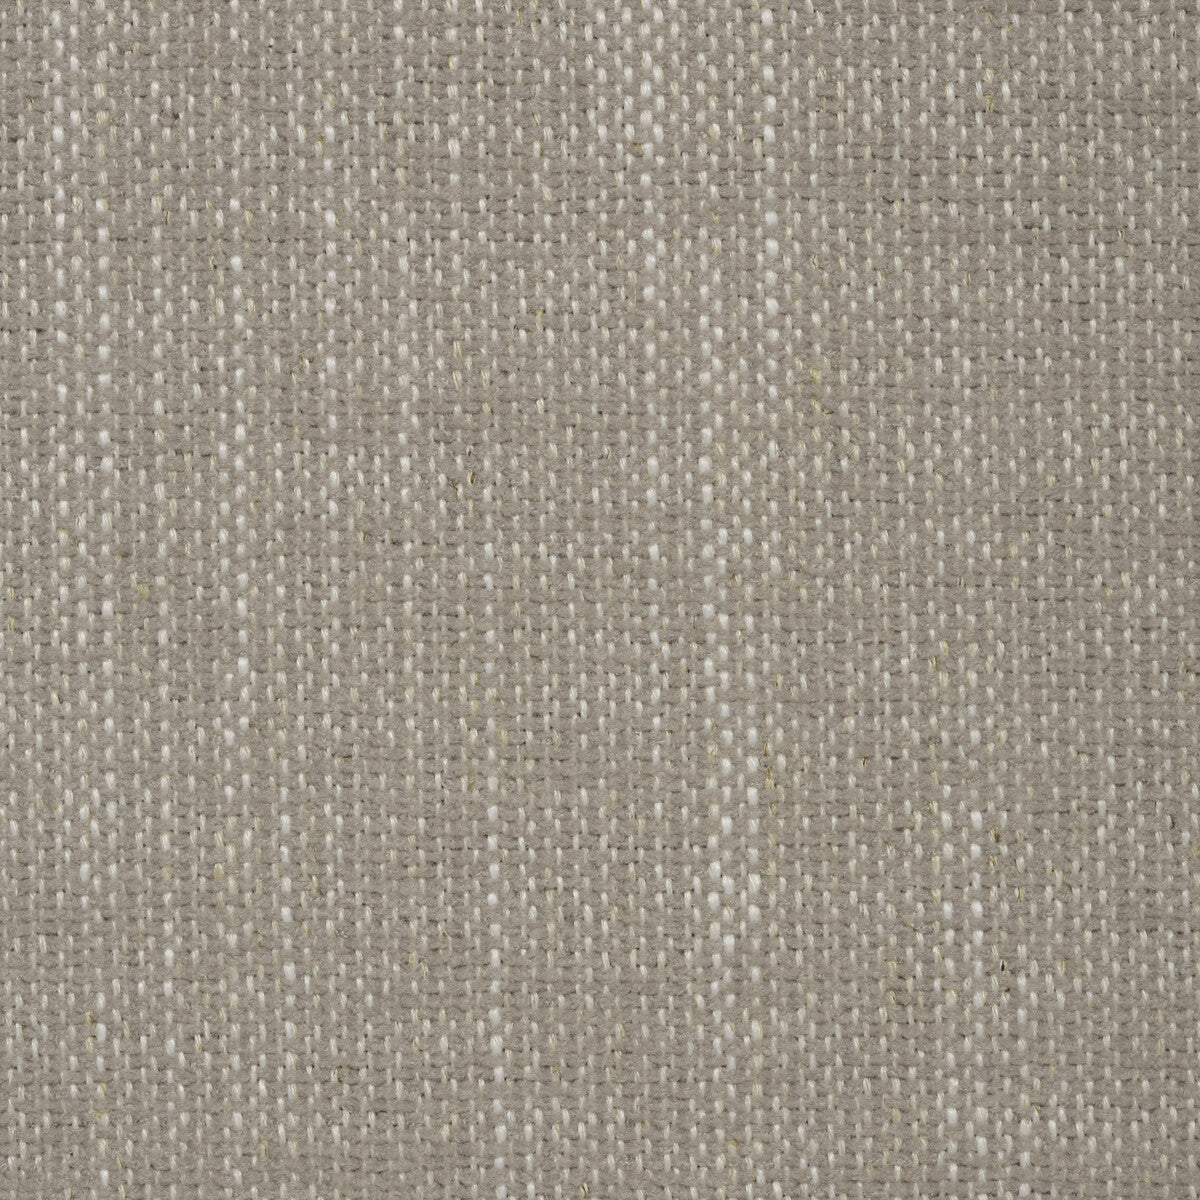 Kravet Contract fabric in 35112-1610 color - pattern 35112.1610.0 - by Kravet Contract in the Crypton Incase collection